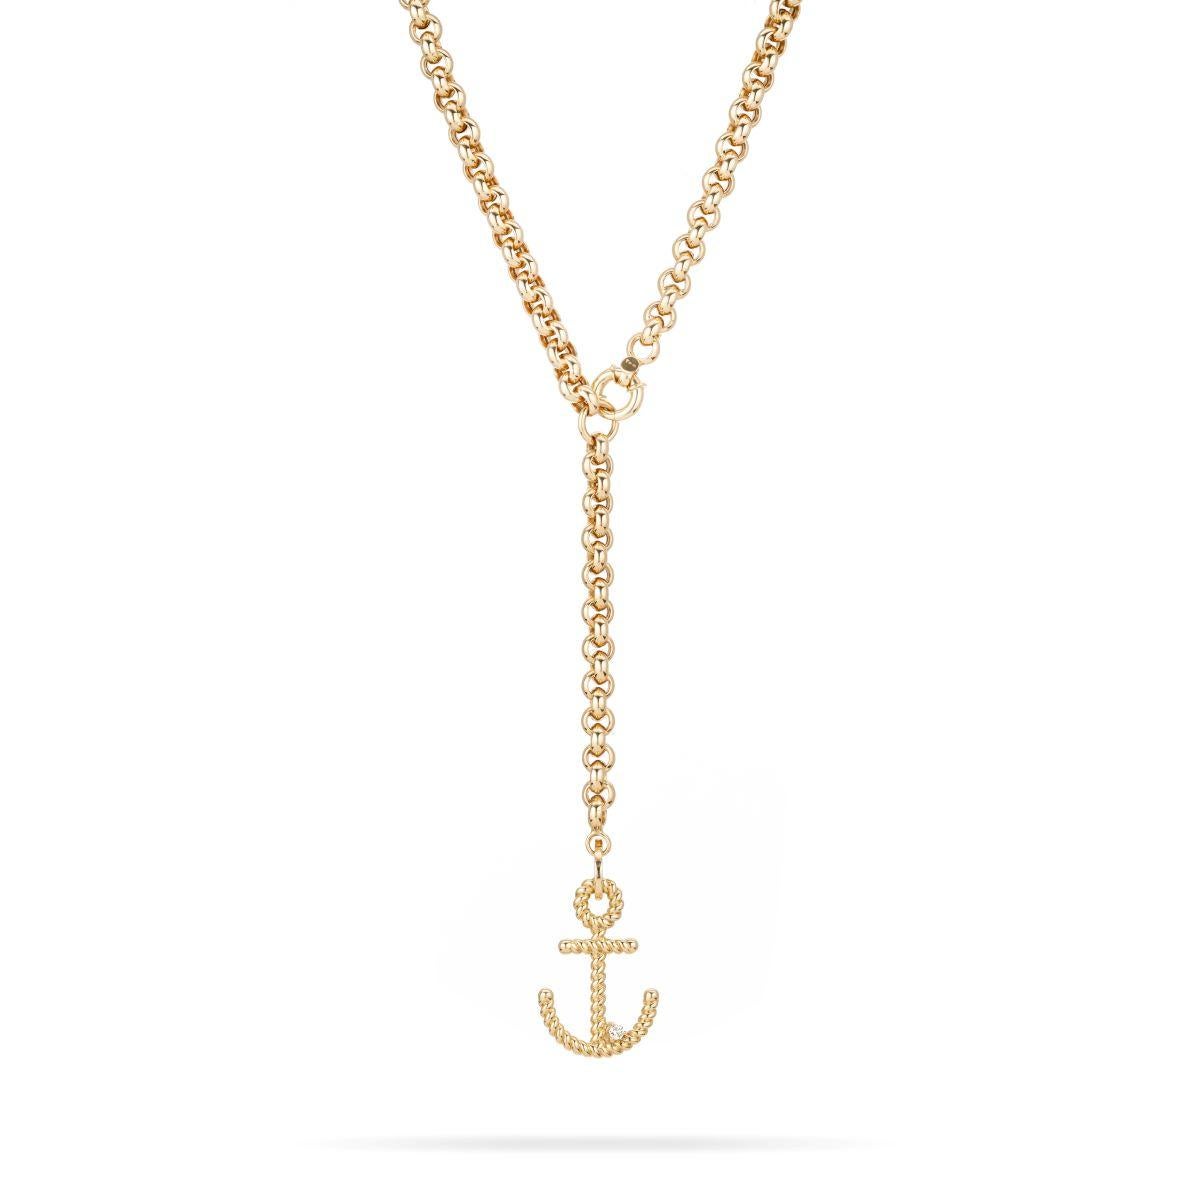 Round Cut Adina Reyter One of a Kind Large Diamond Anchor Rolo Lariat Necklace For Sale